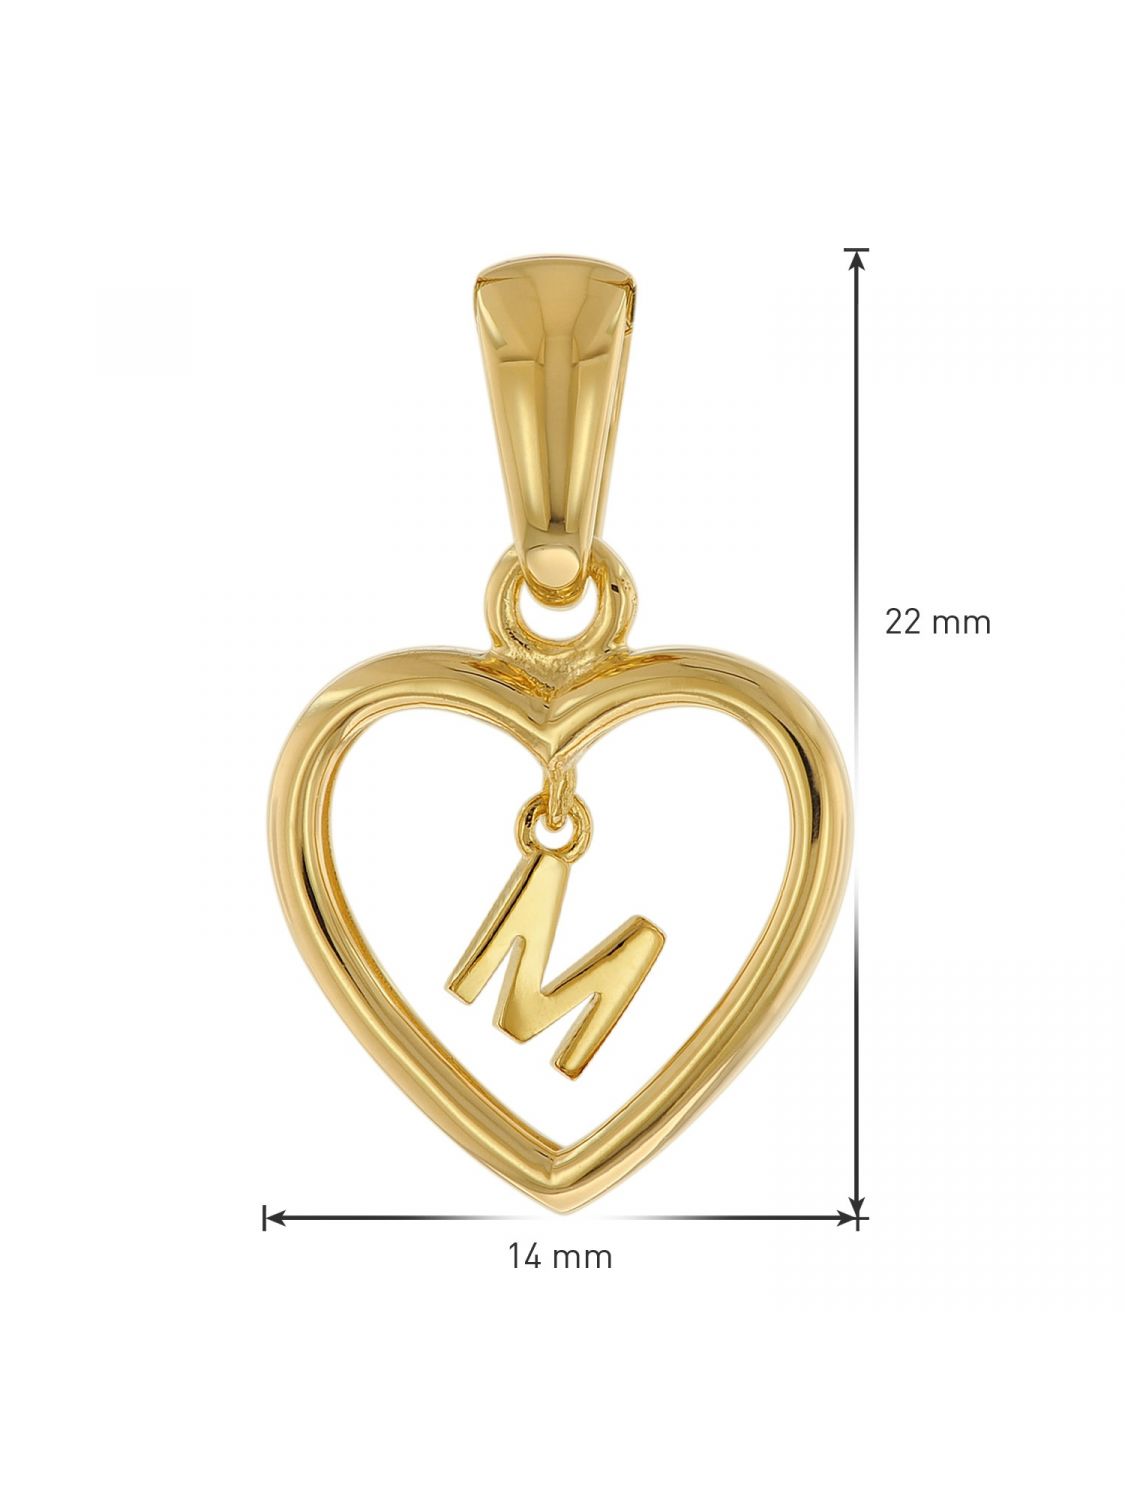 trendor 51850-M Heart Pendant with Letter M Gold Plated 925 Silver